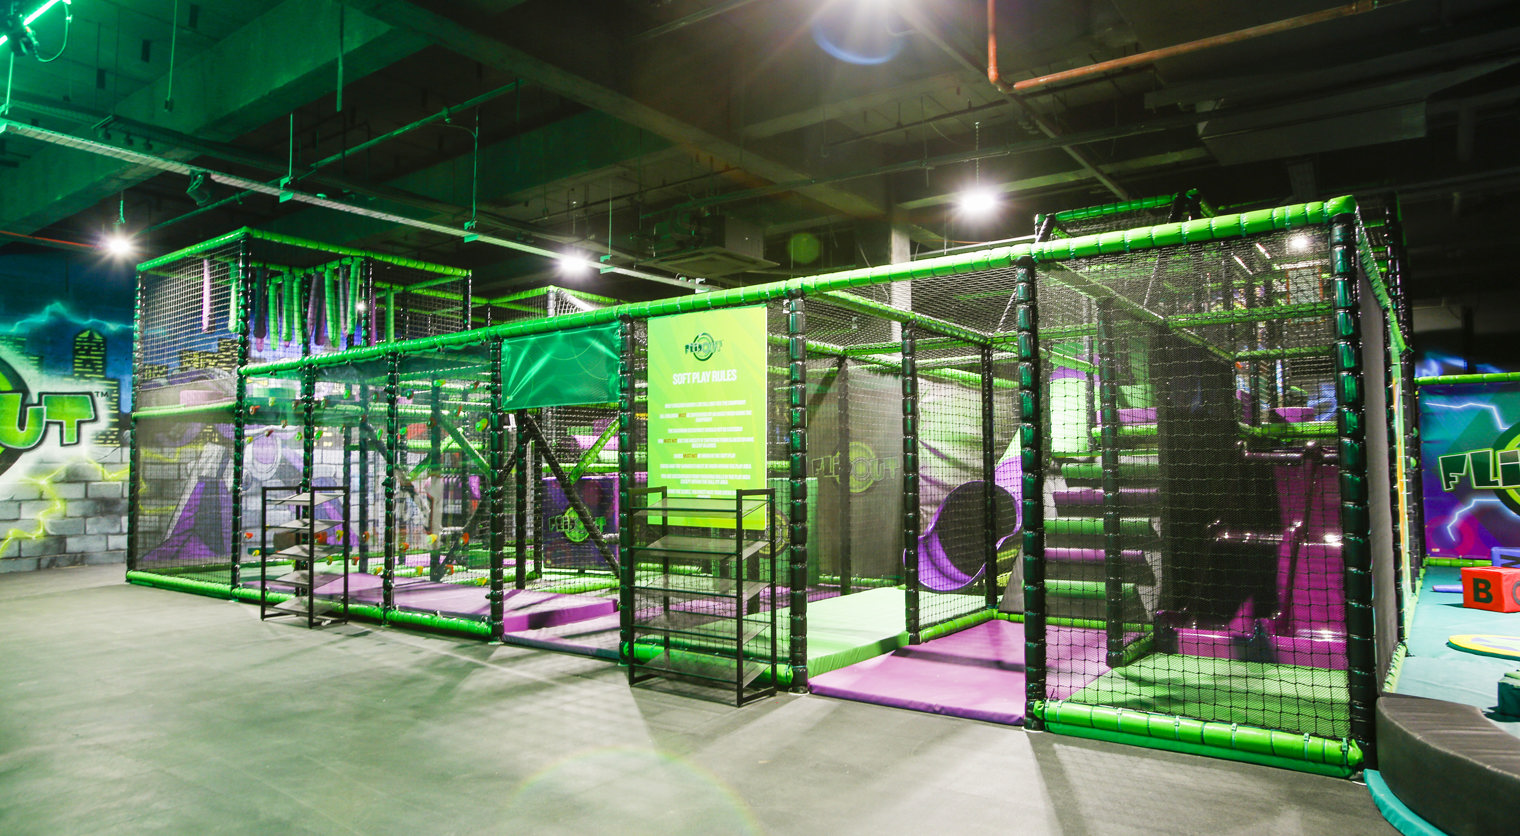 Junior Soft Play area at Flip Out UK